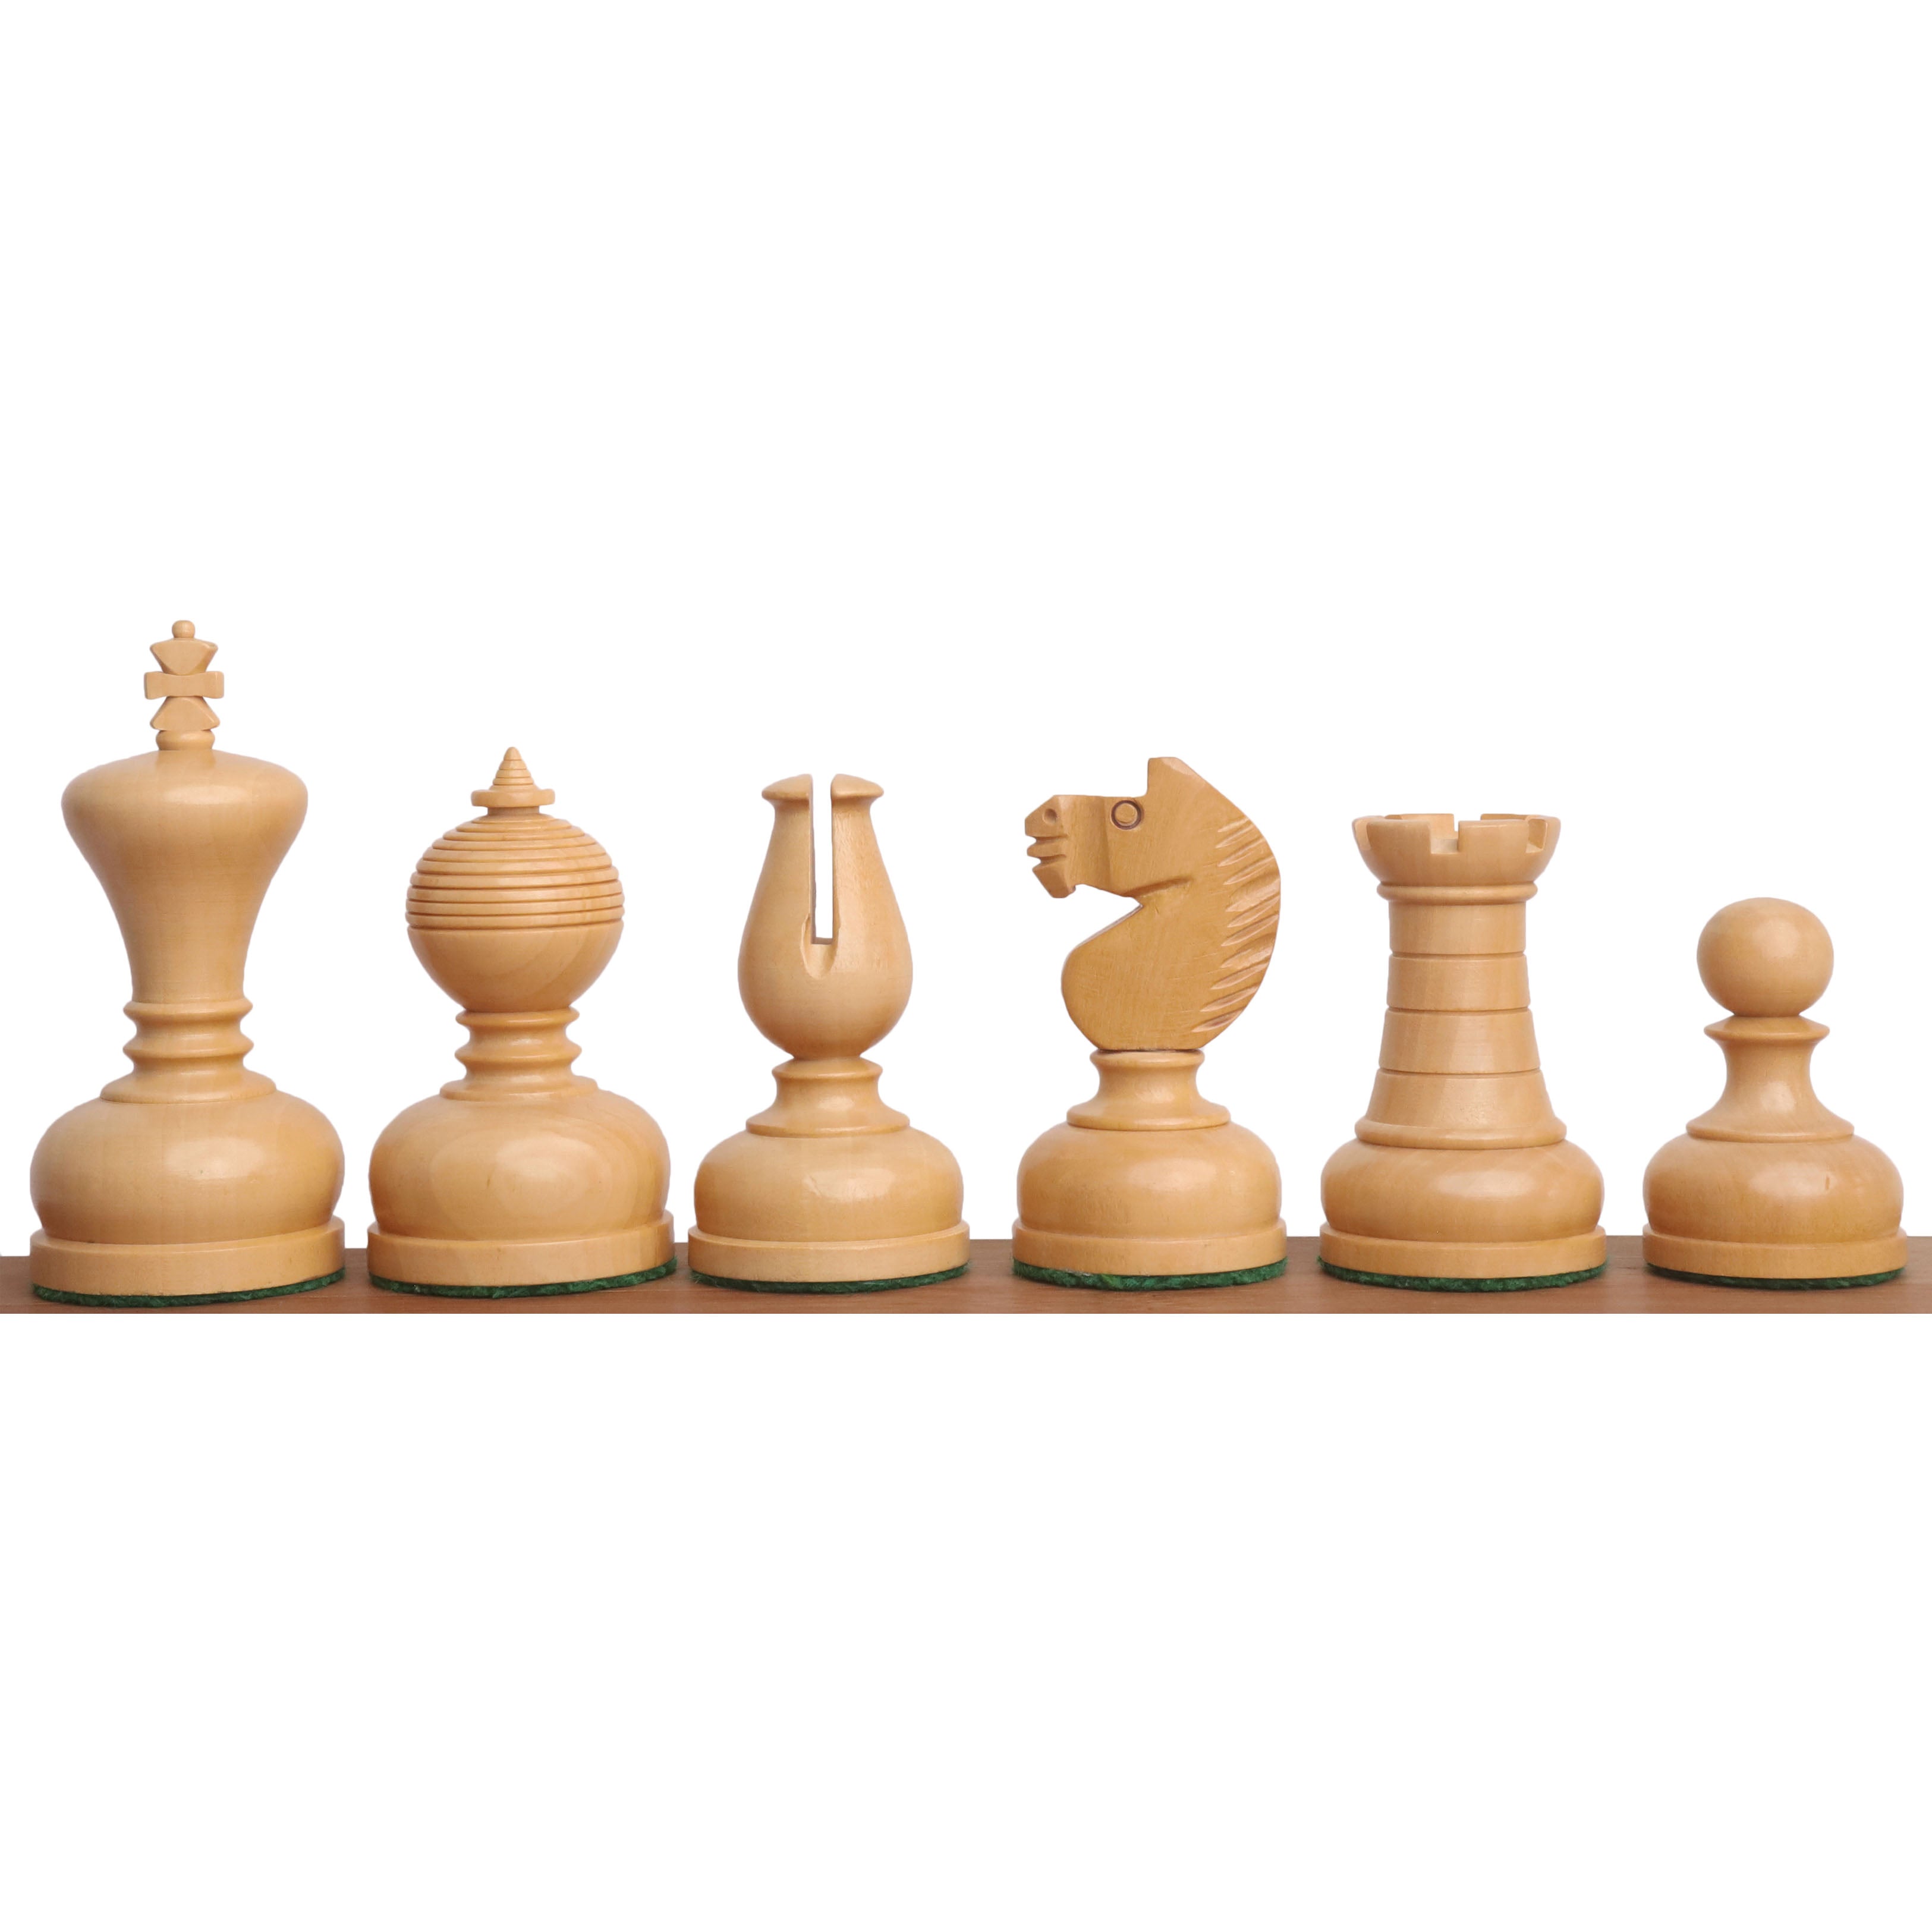 English staunton 1841 3.85 plastic chess pieces - weighted